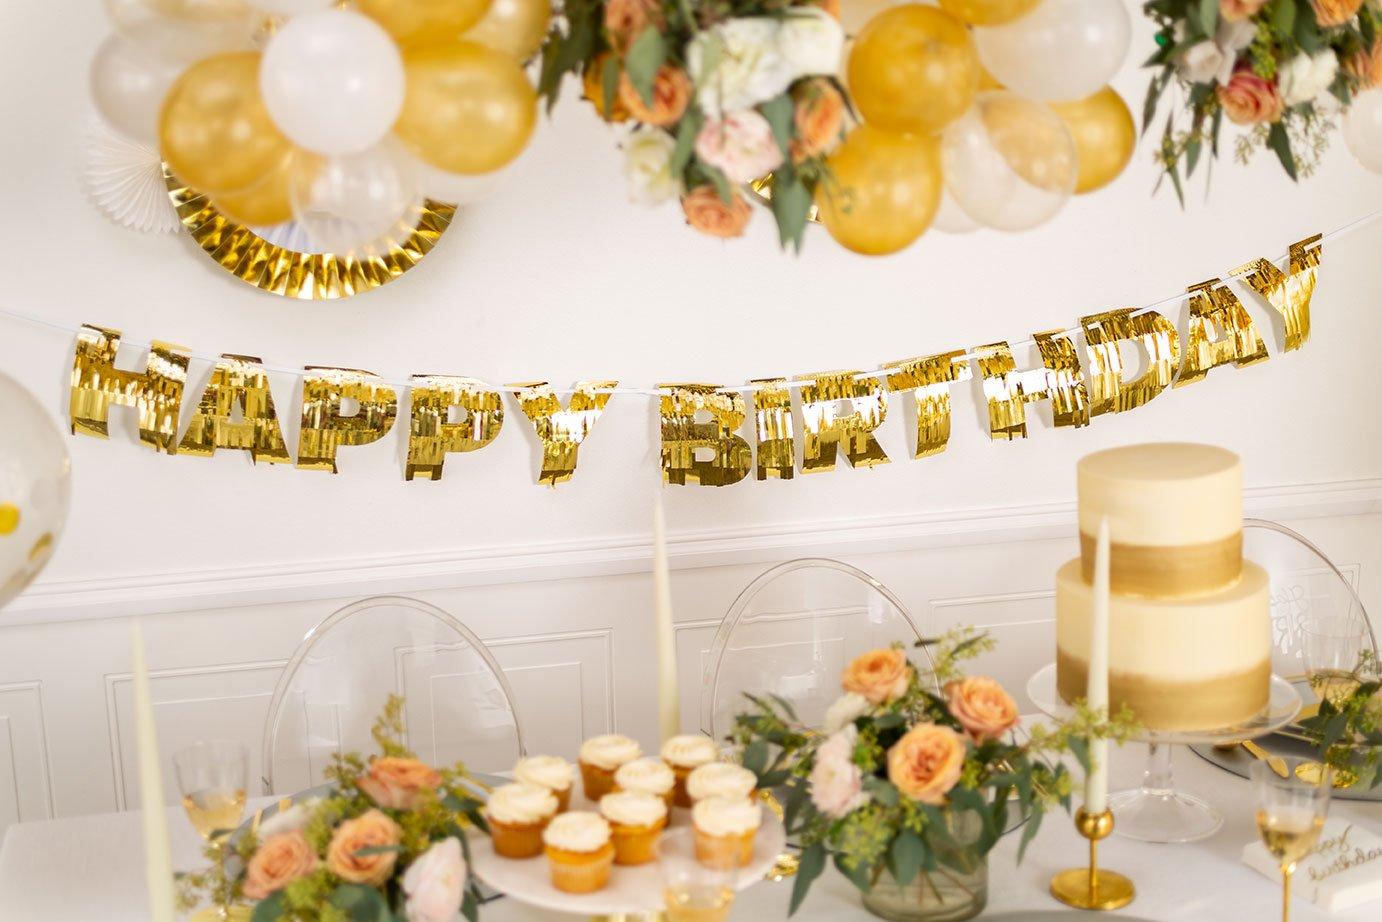 How to Decorate for a Birthday Party: Ultimate Guide